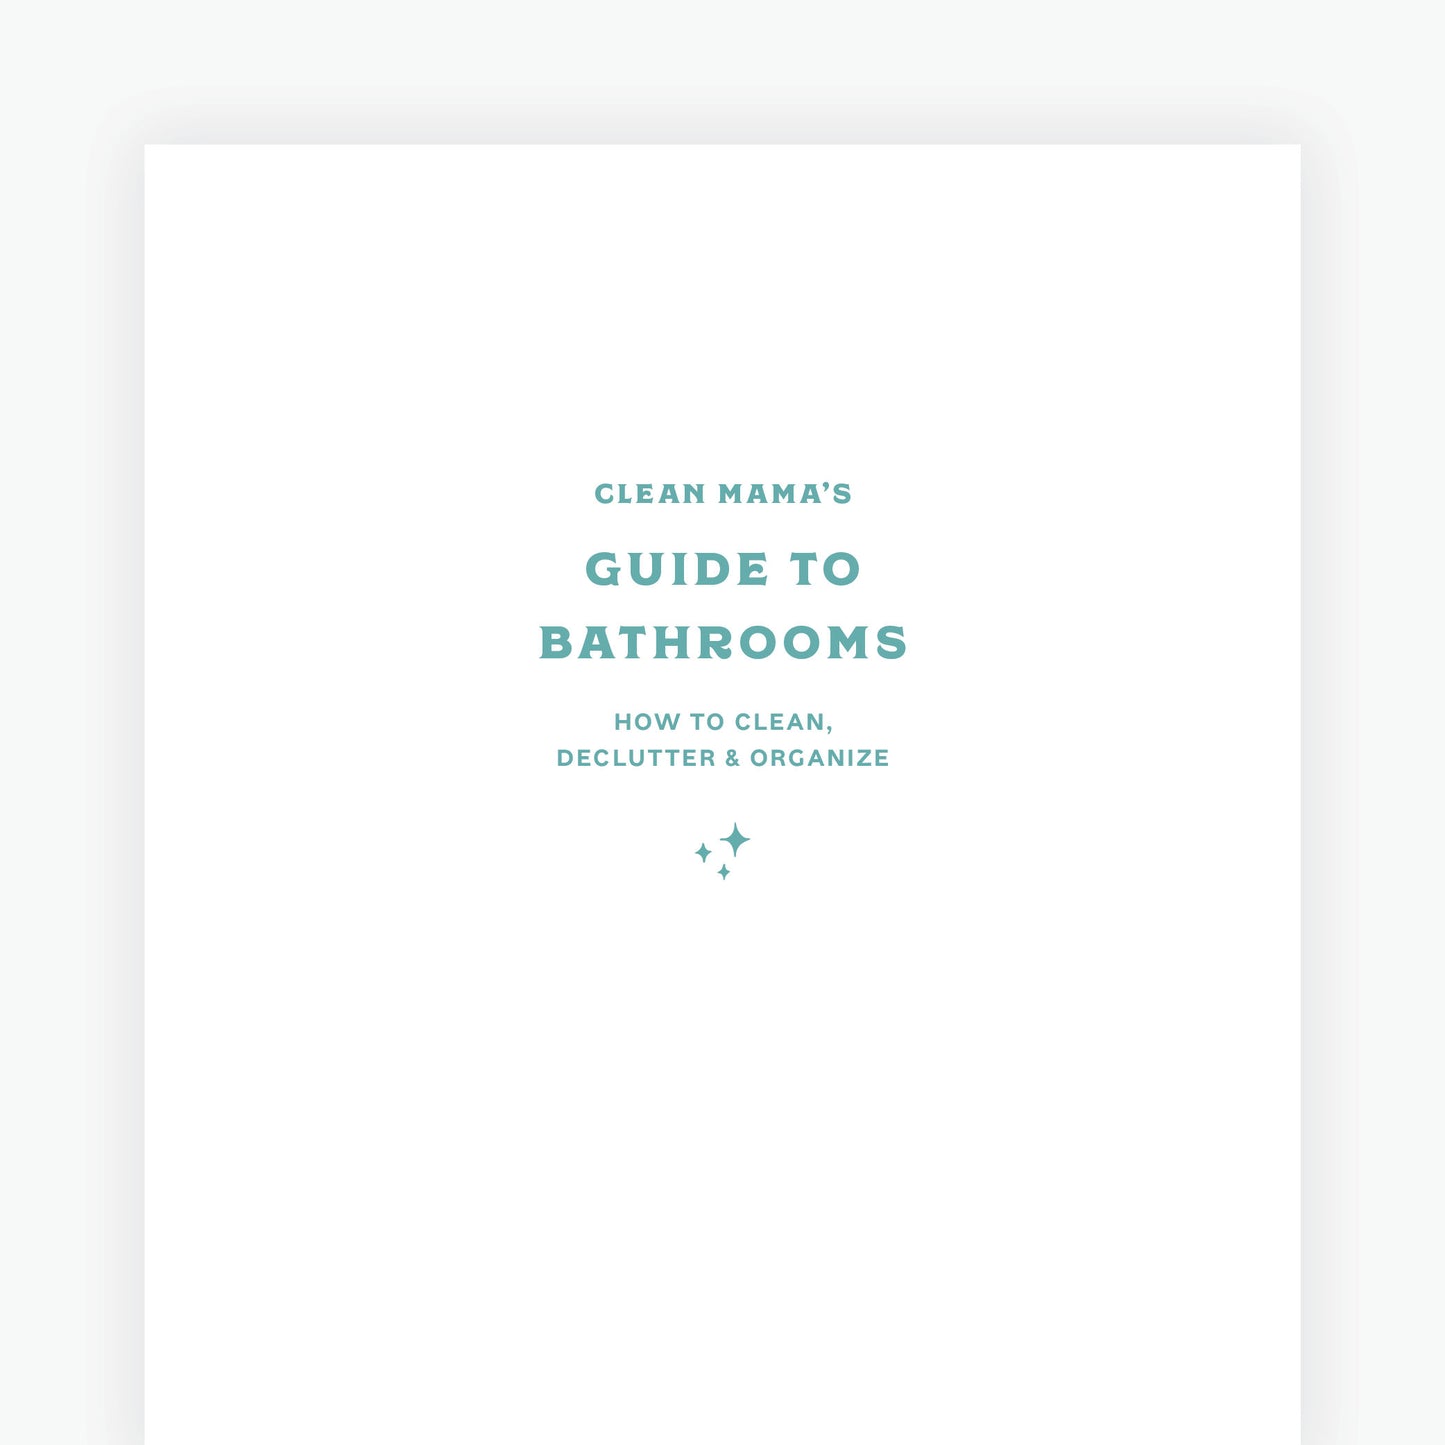 Guide to Bathrooms